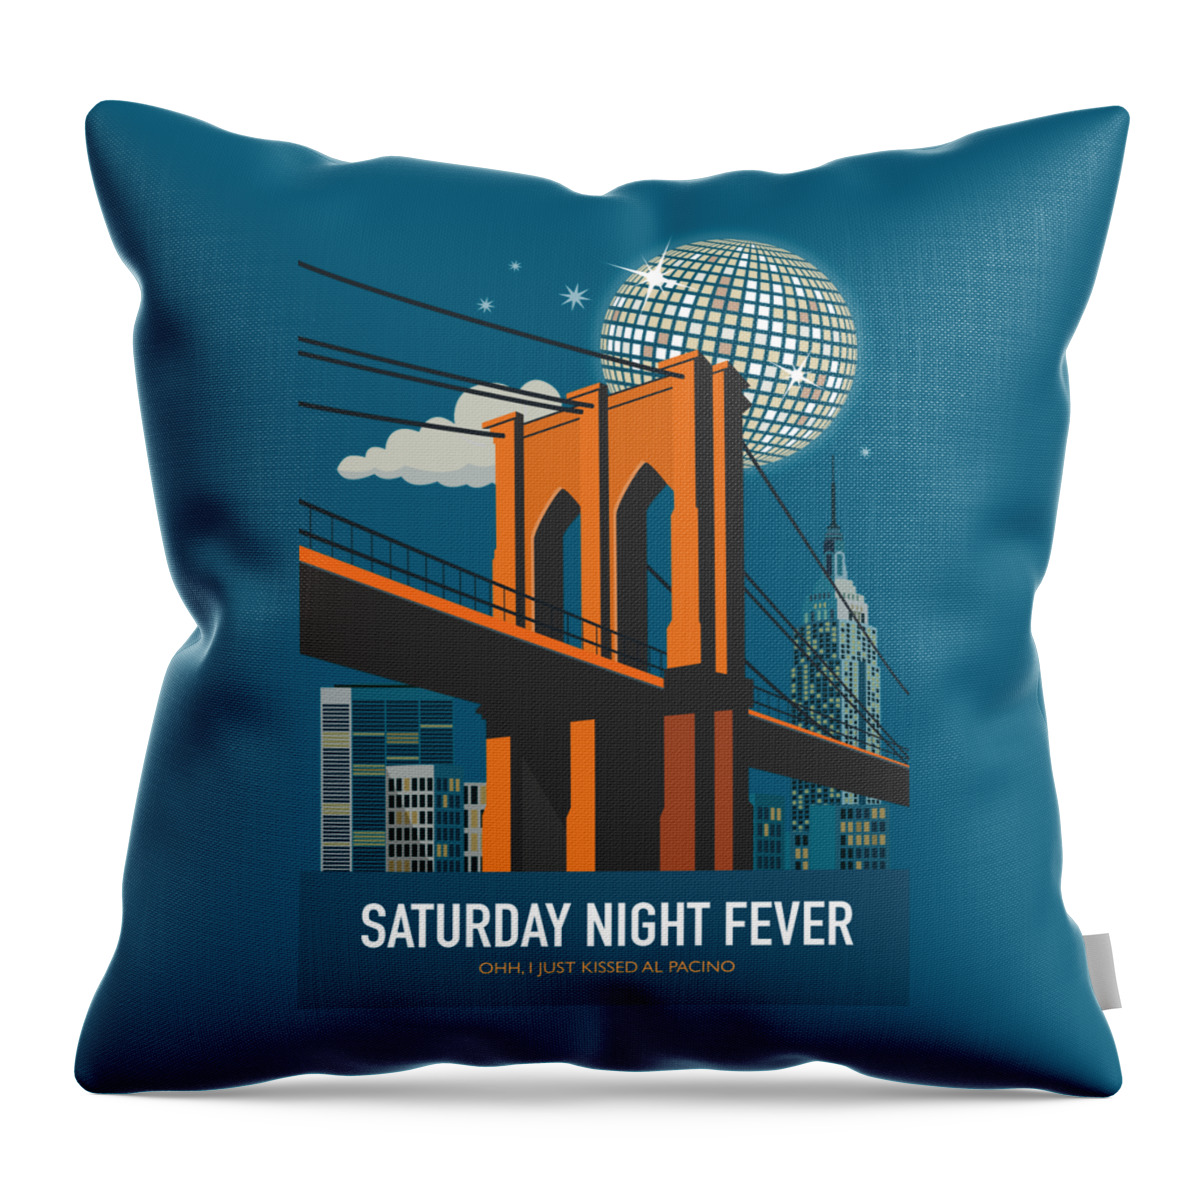 Saturday Night Fever Throw Pillow featuring the digital art Saturday Night Fever - Alternative Movie Poster by Movie Poster Boy